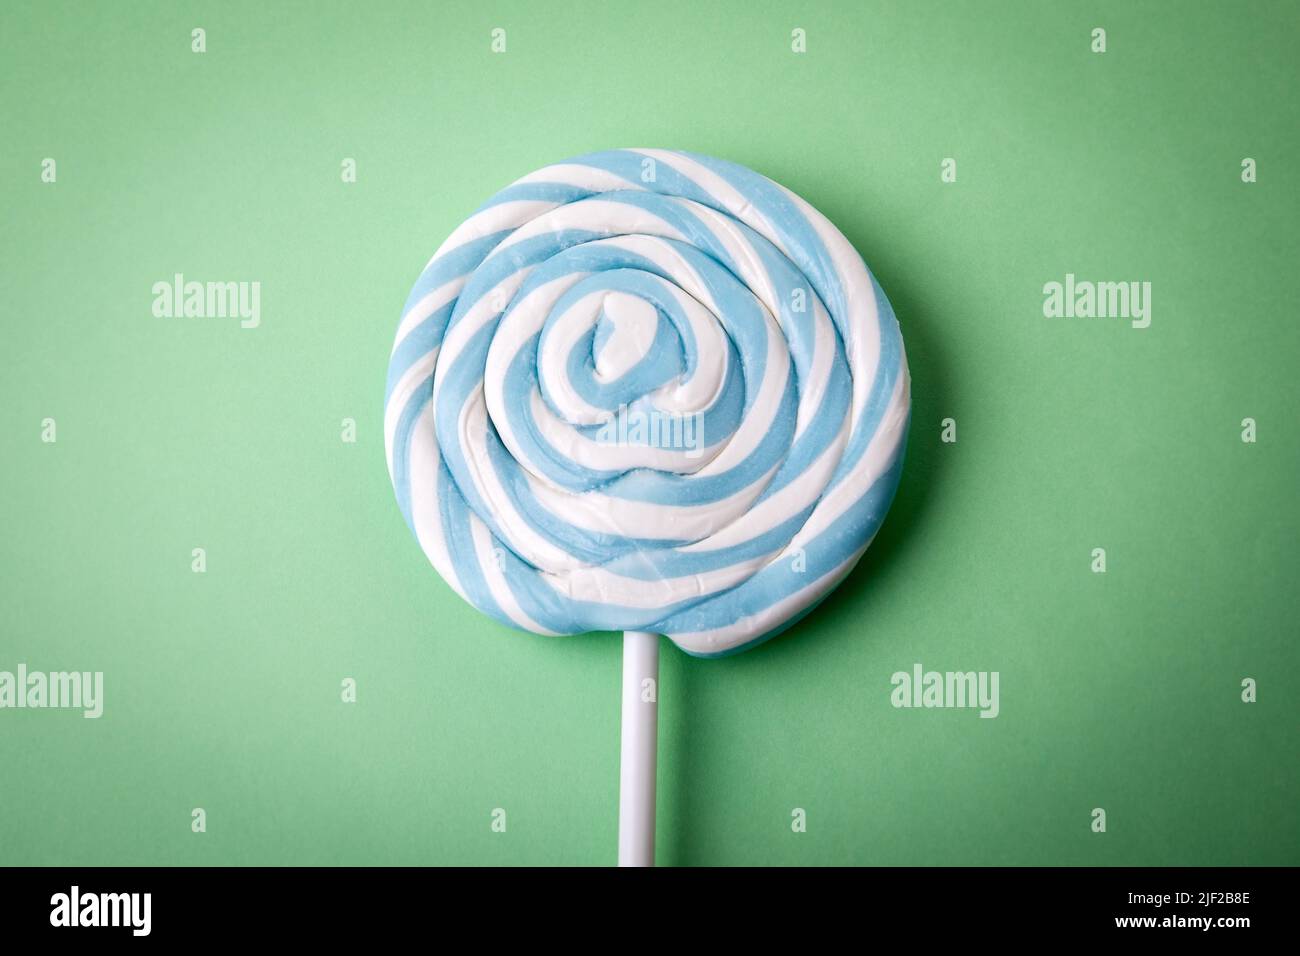 Brightly colored candy, lollipop on a stick. Green background. Stock Photo